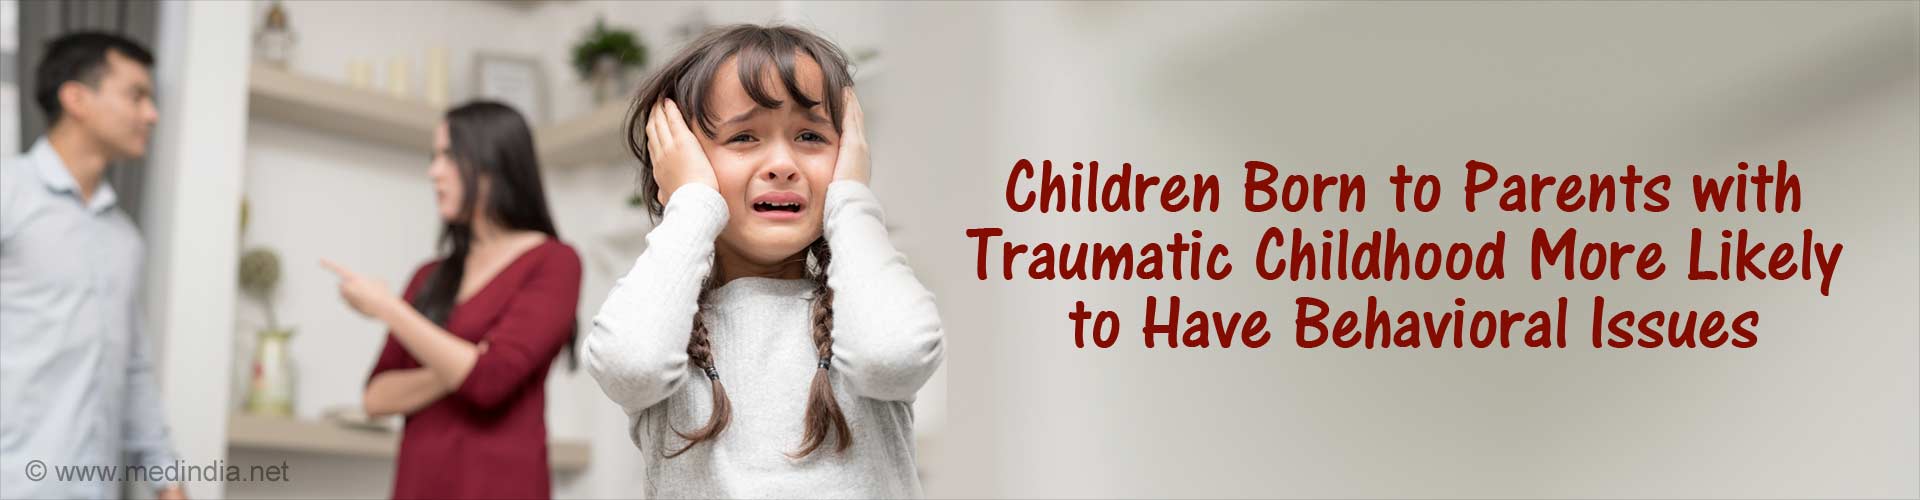 Children born to parents with traumatic childhood more likely to have behavioral issues.